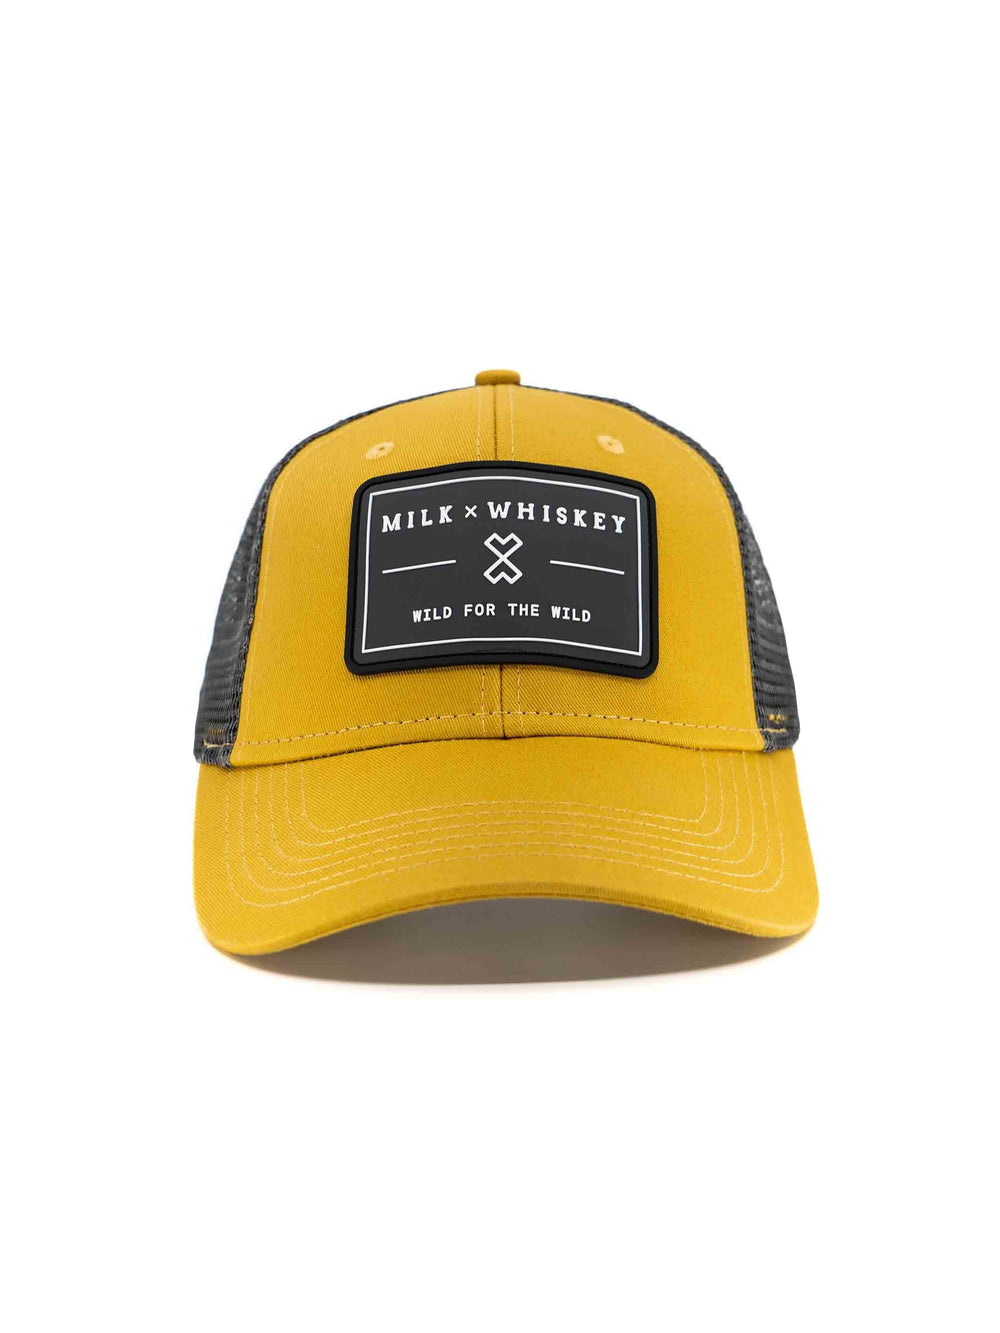 Wild For The Wild - Low Pro Trucker Hat Milk x Whiskey Camel/Charcoal 